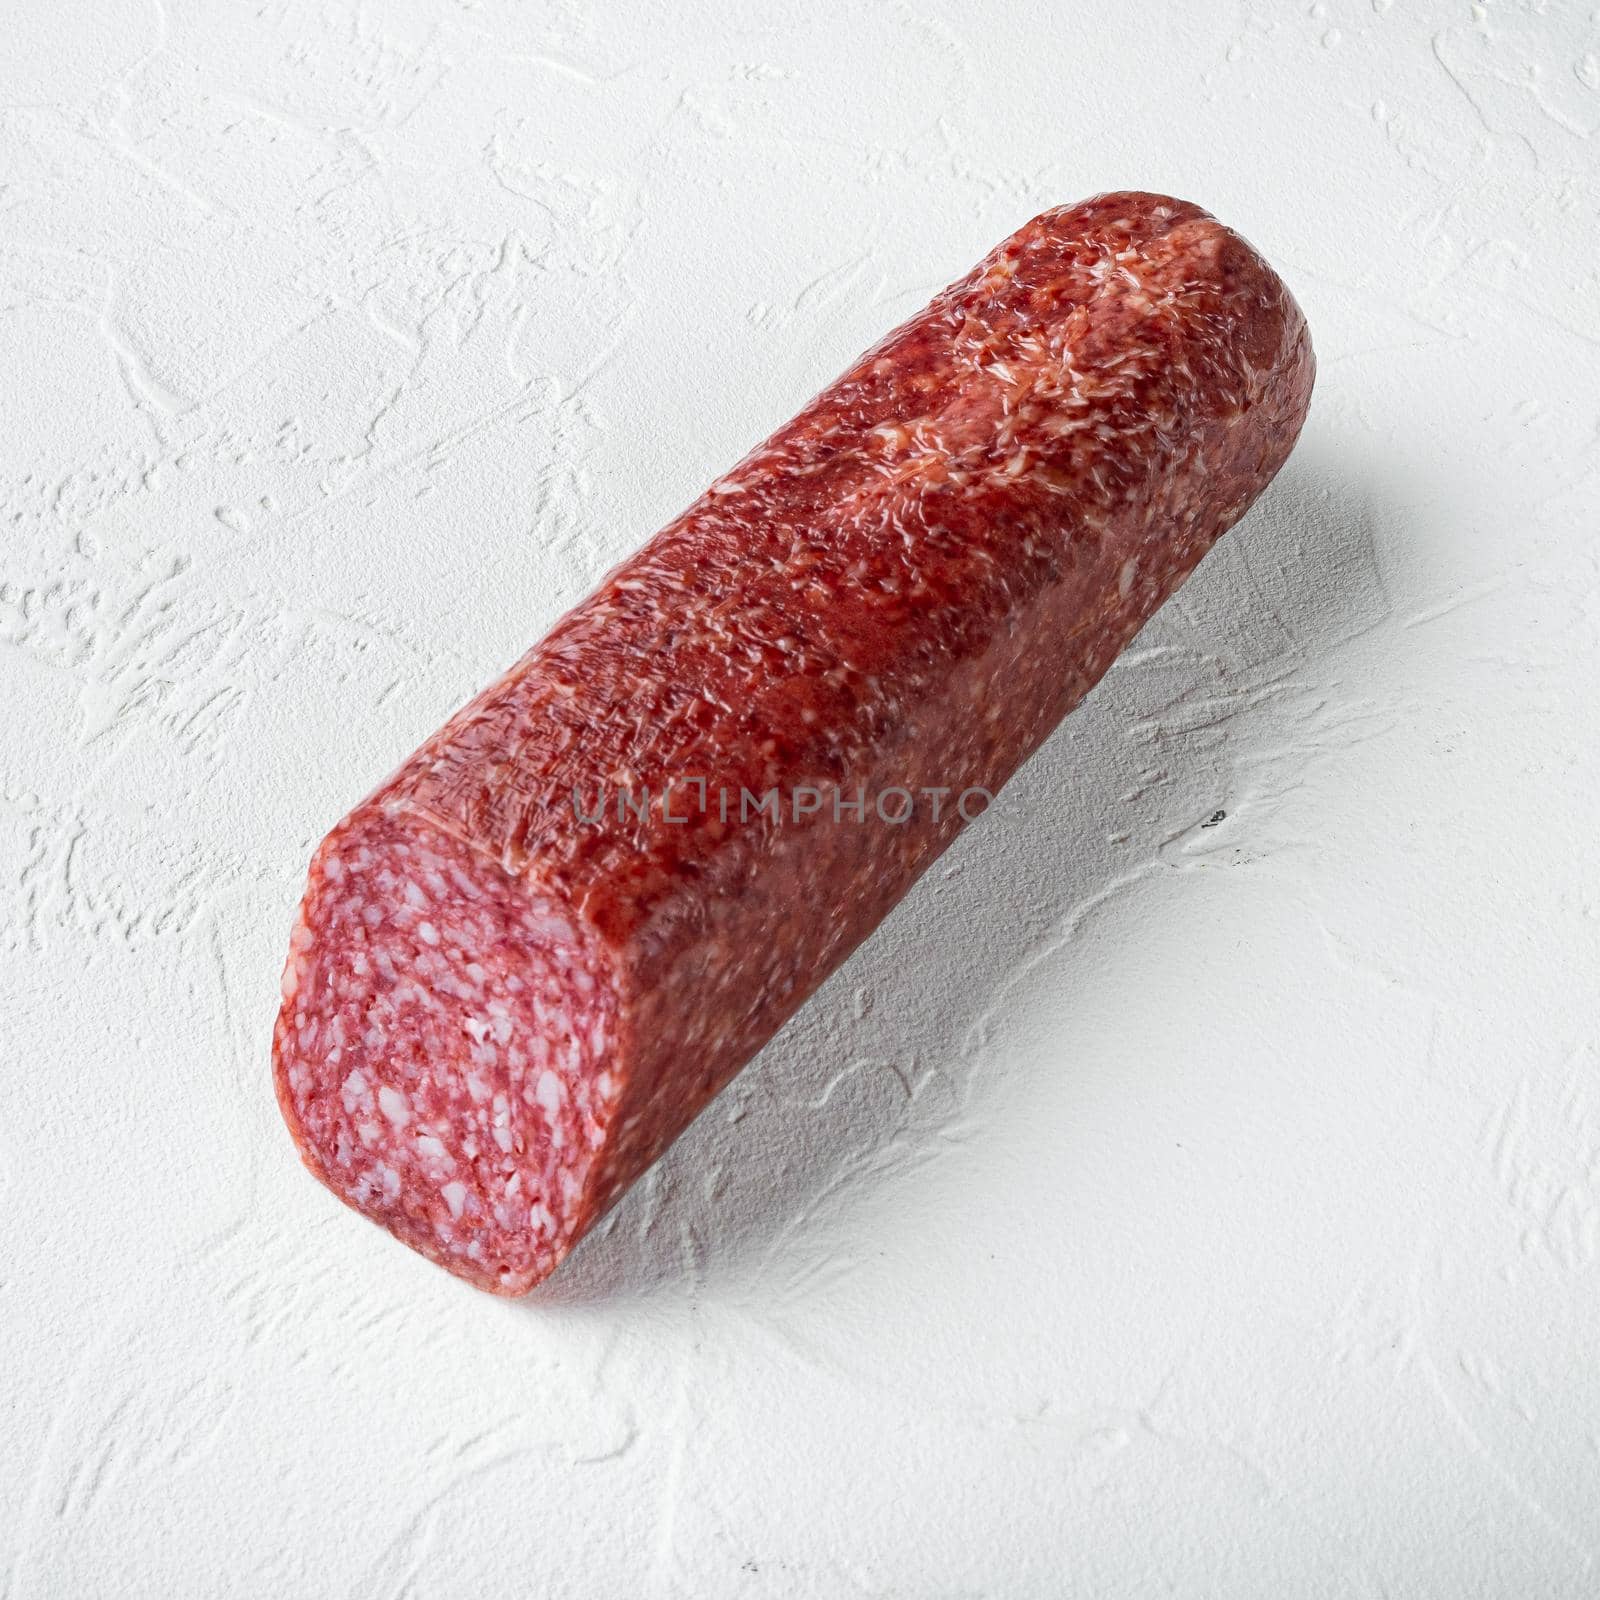 Traditional smoked salami sausage with spices, square format, on white stone table background by Ilianesolenyi